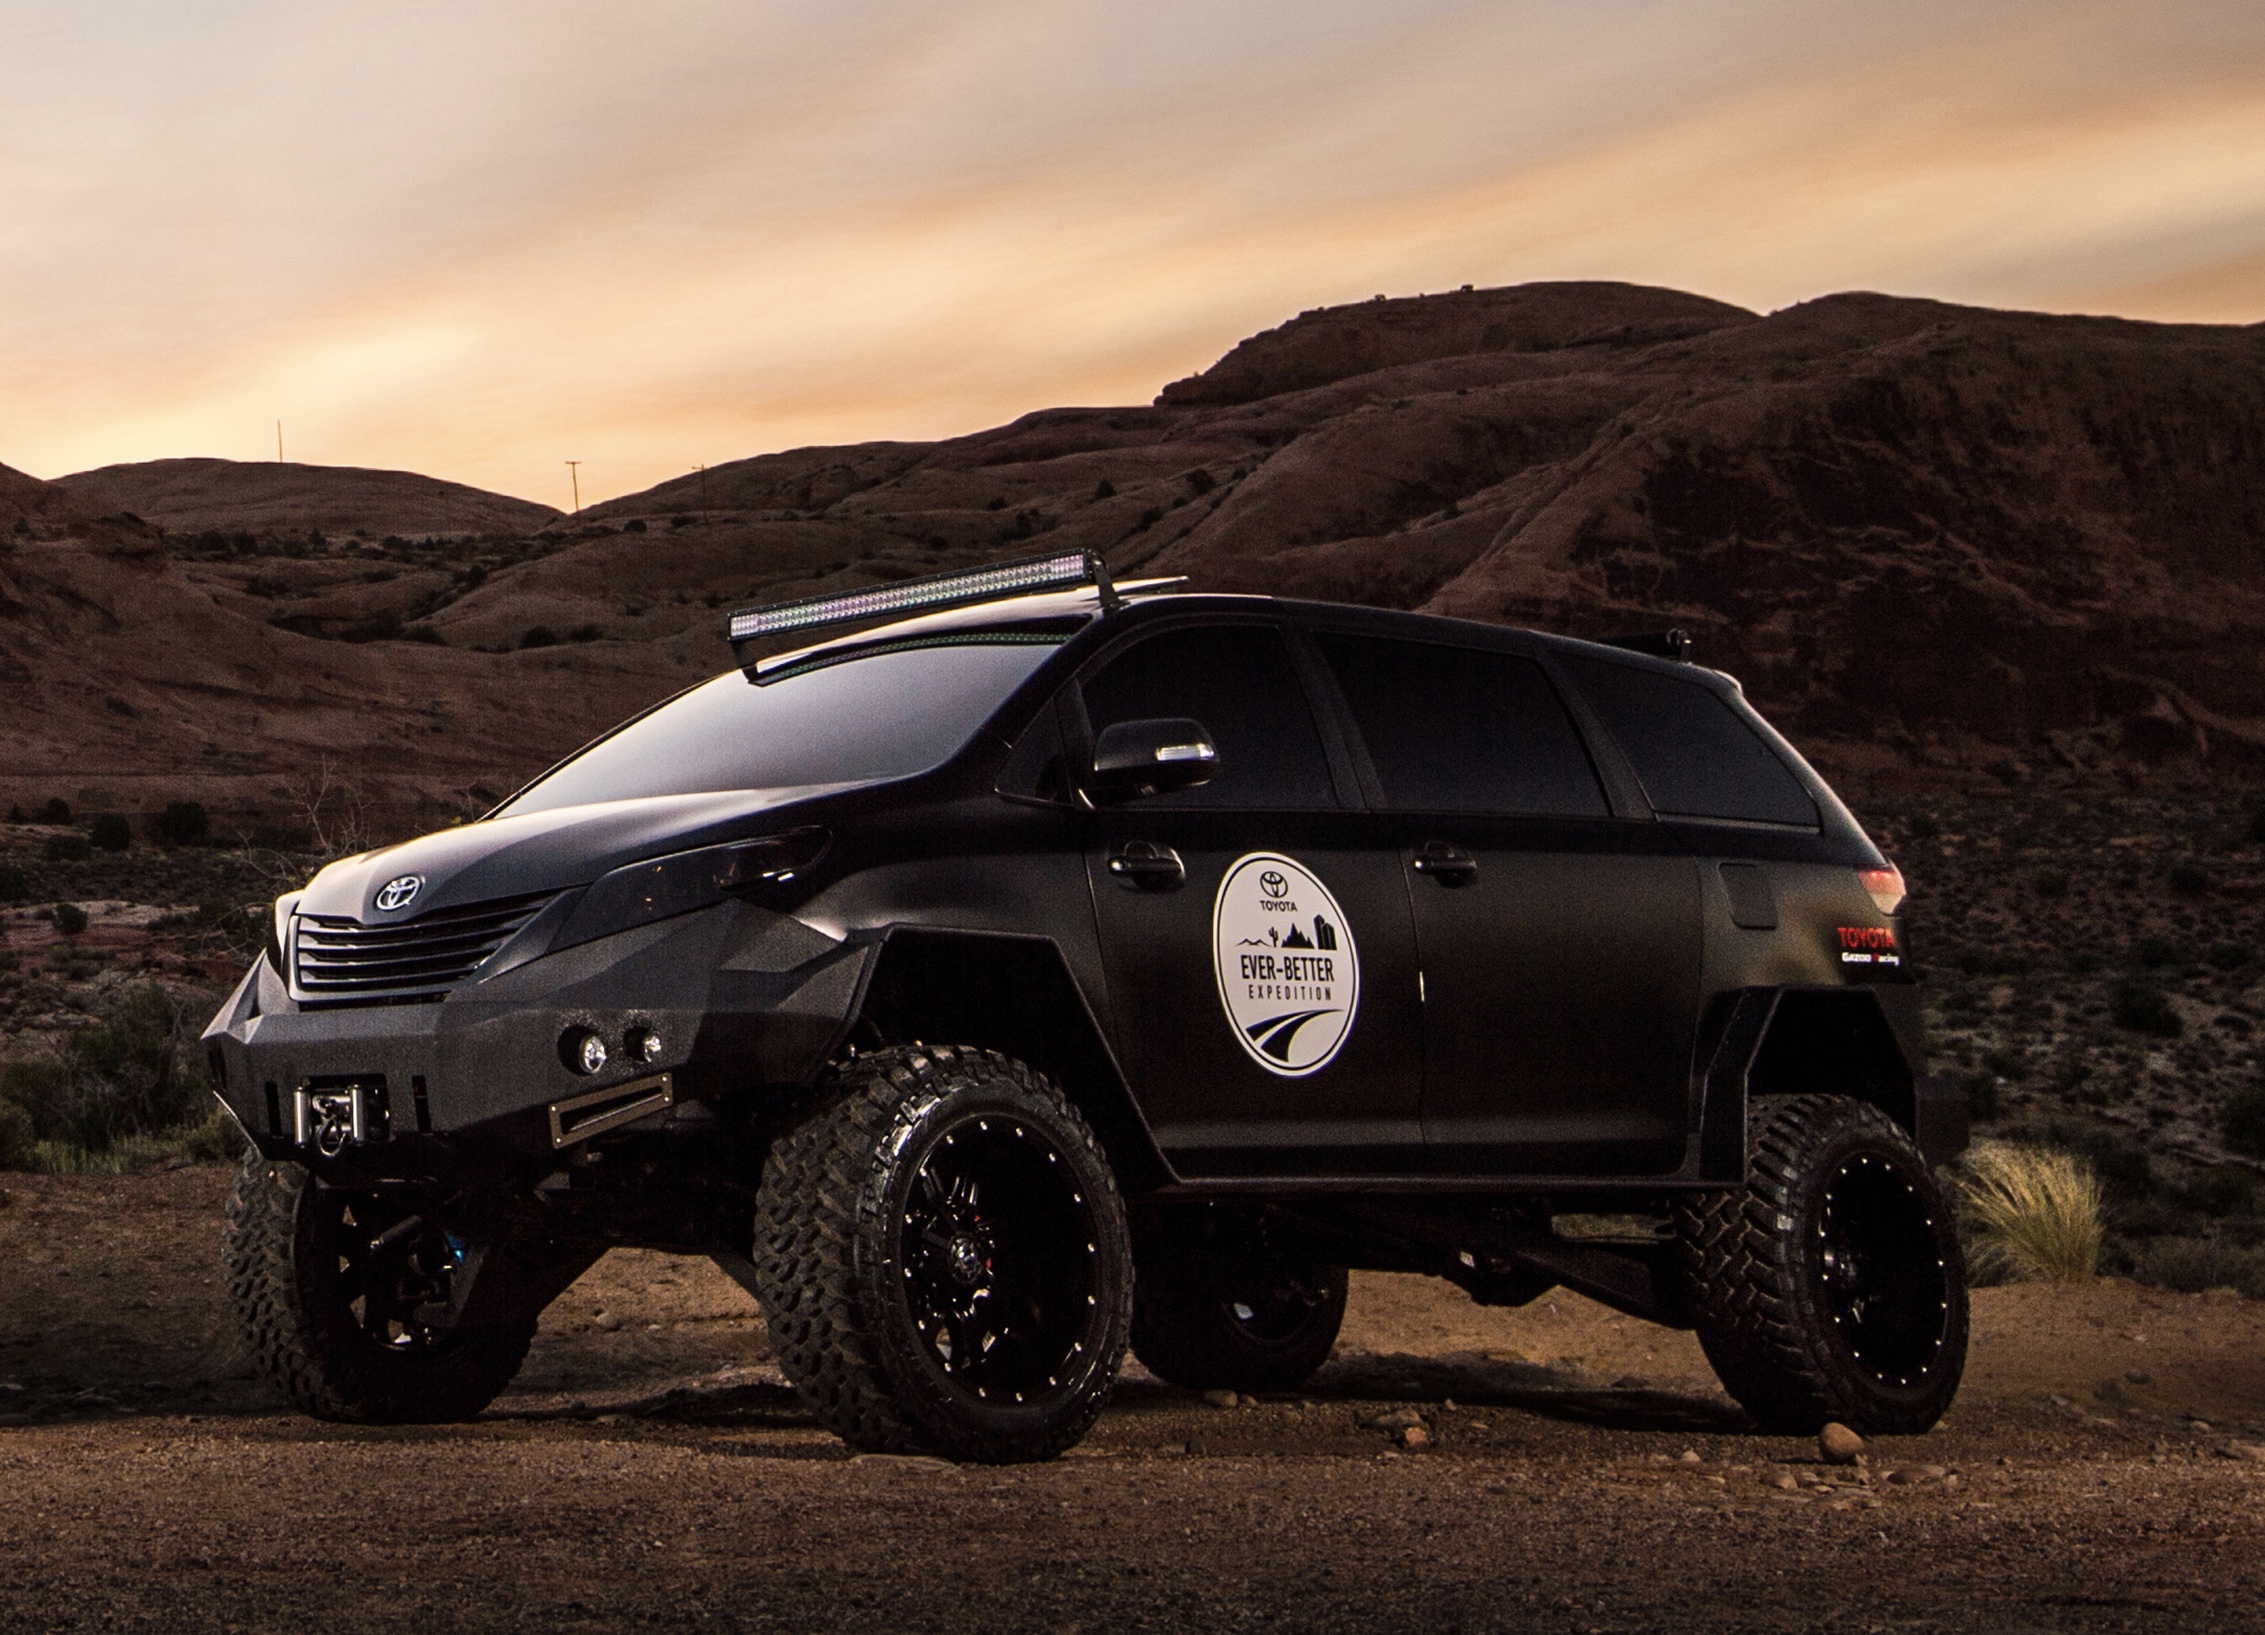 a black on black Toyota Sienna overland vehicle with massive tires in a desert scene